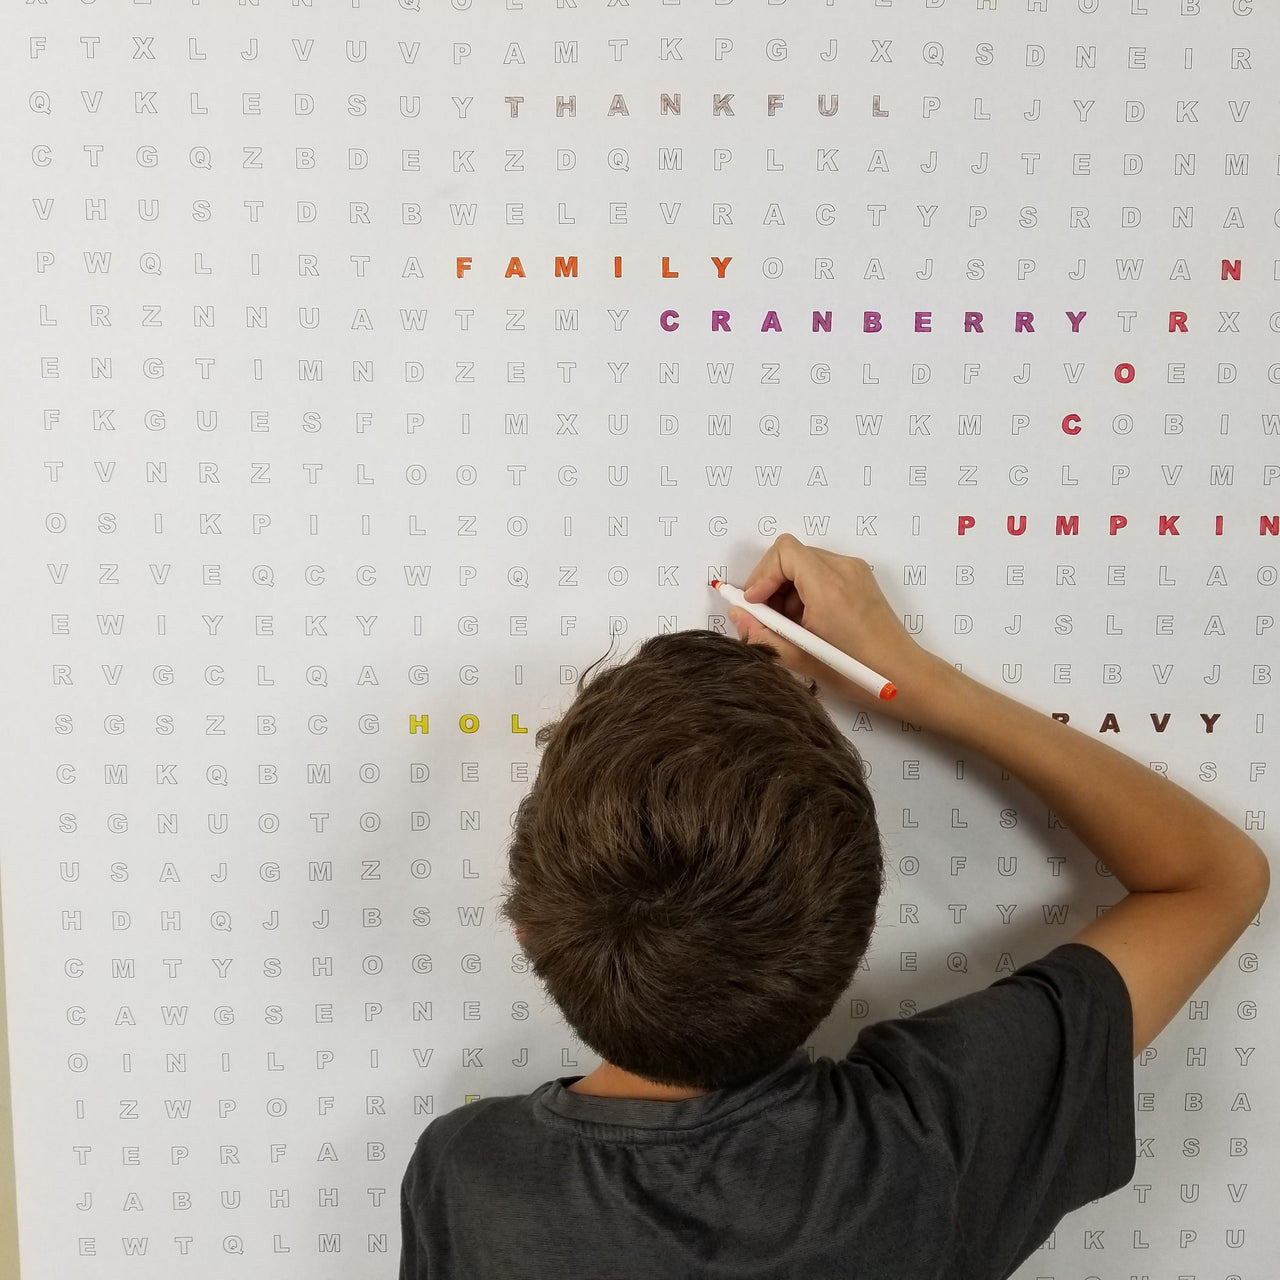 Connecticut State Giant Word Search Puzzle